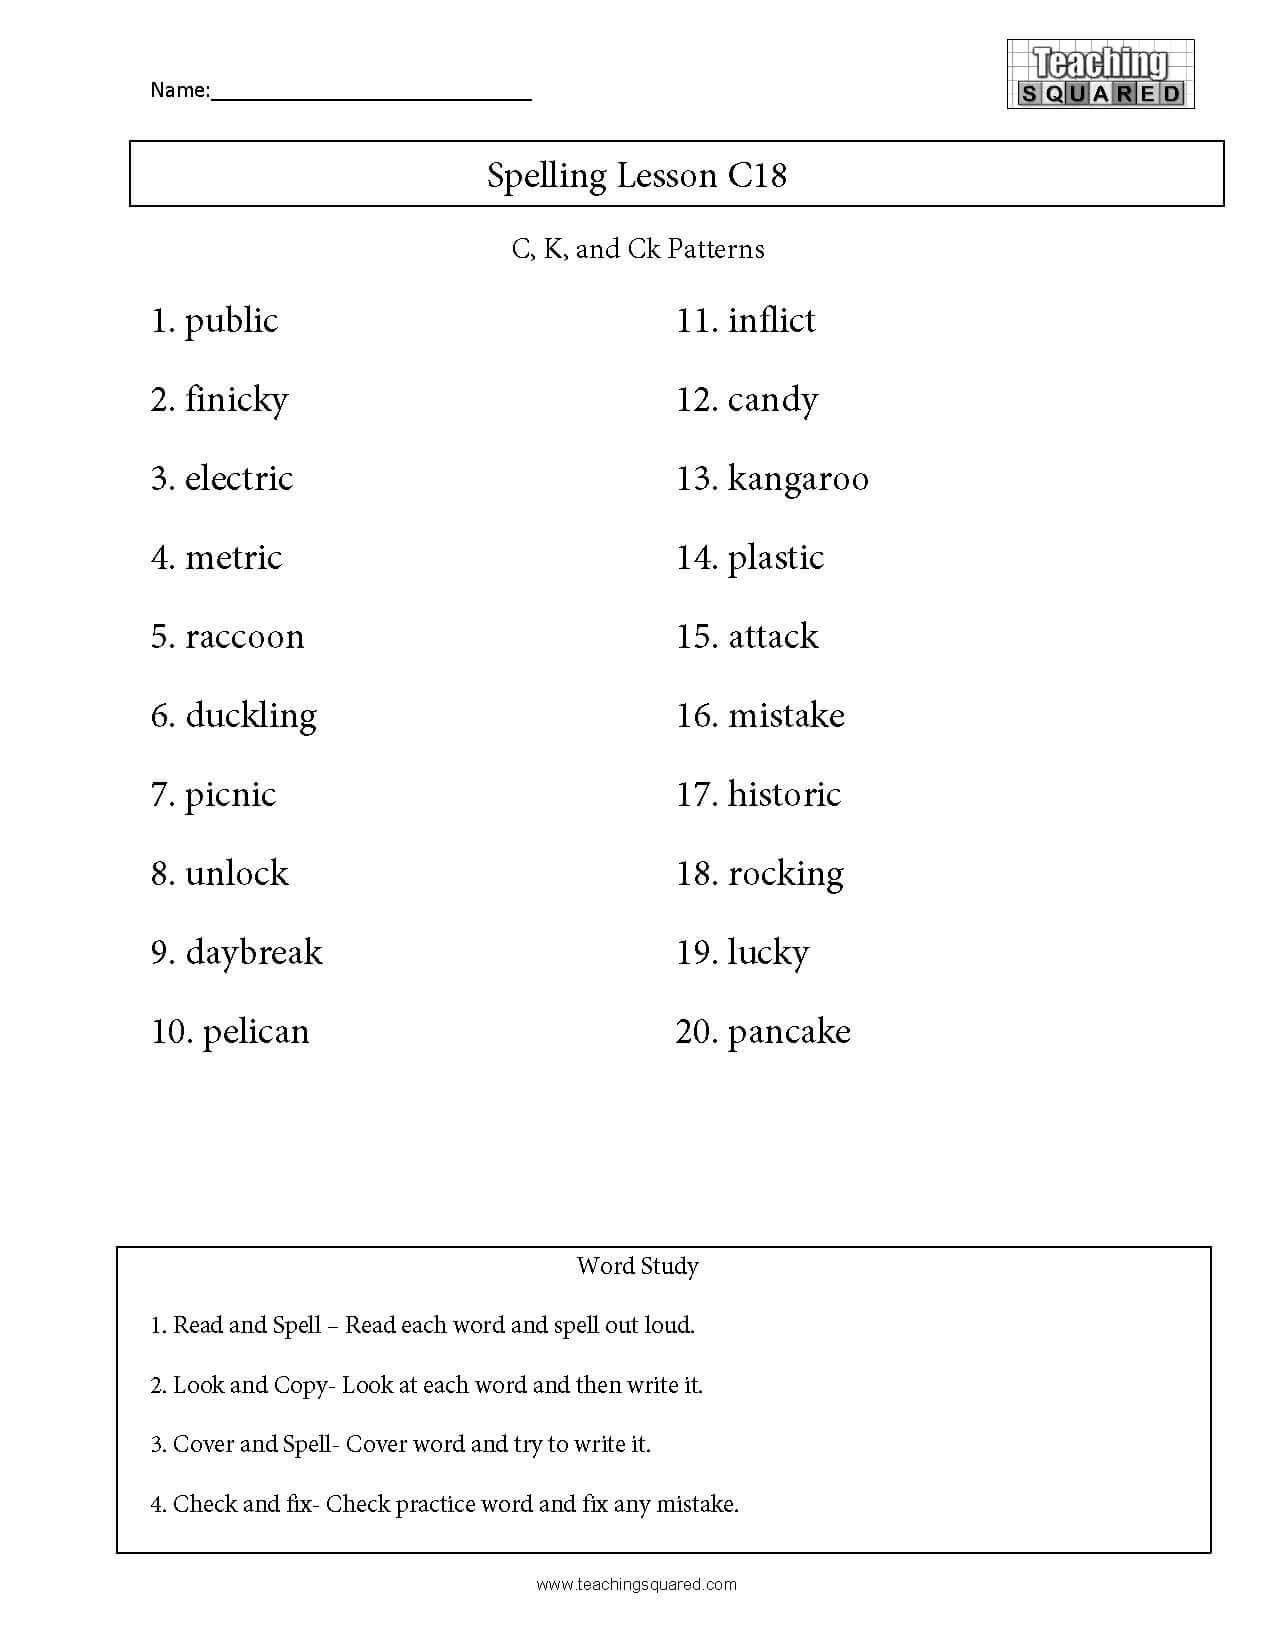 Ck Worksheets for 2nd Grade Spelling List C18 C K and Ck Patterns Teaching Squared